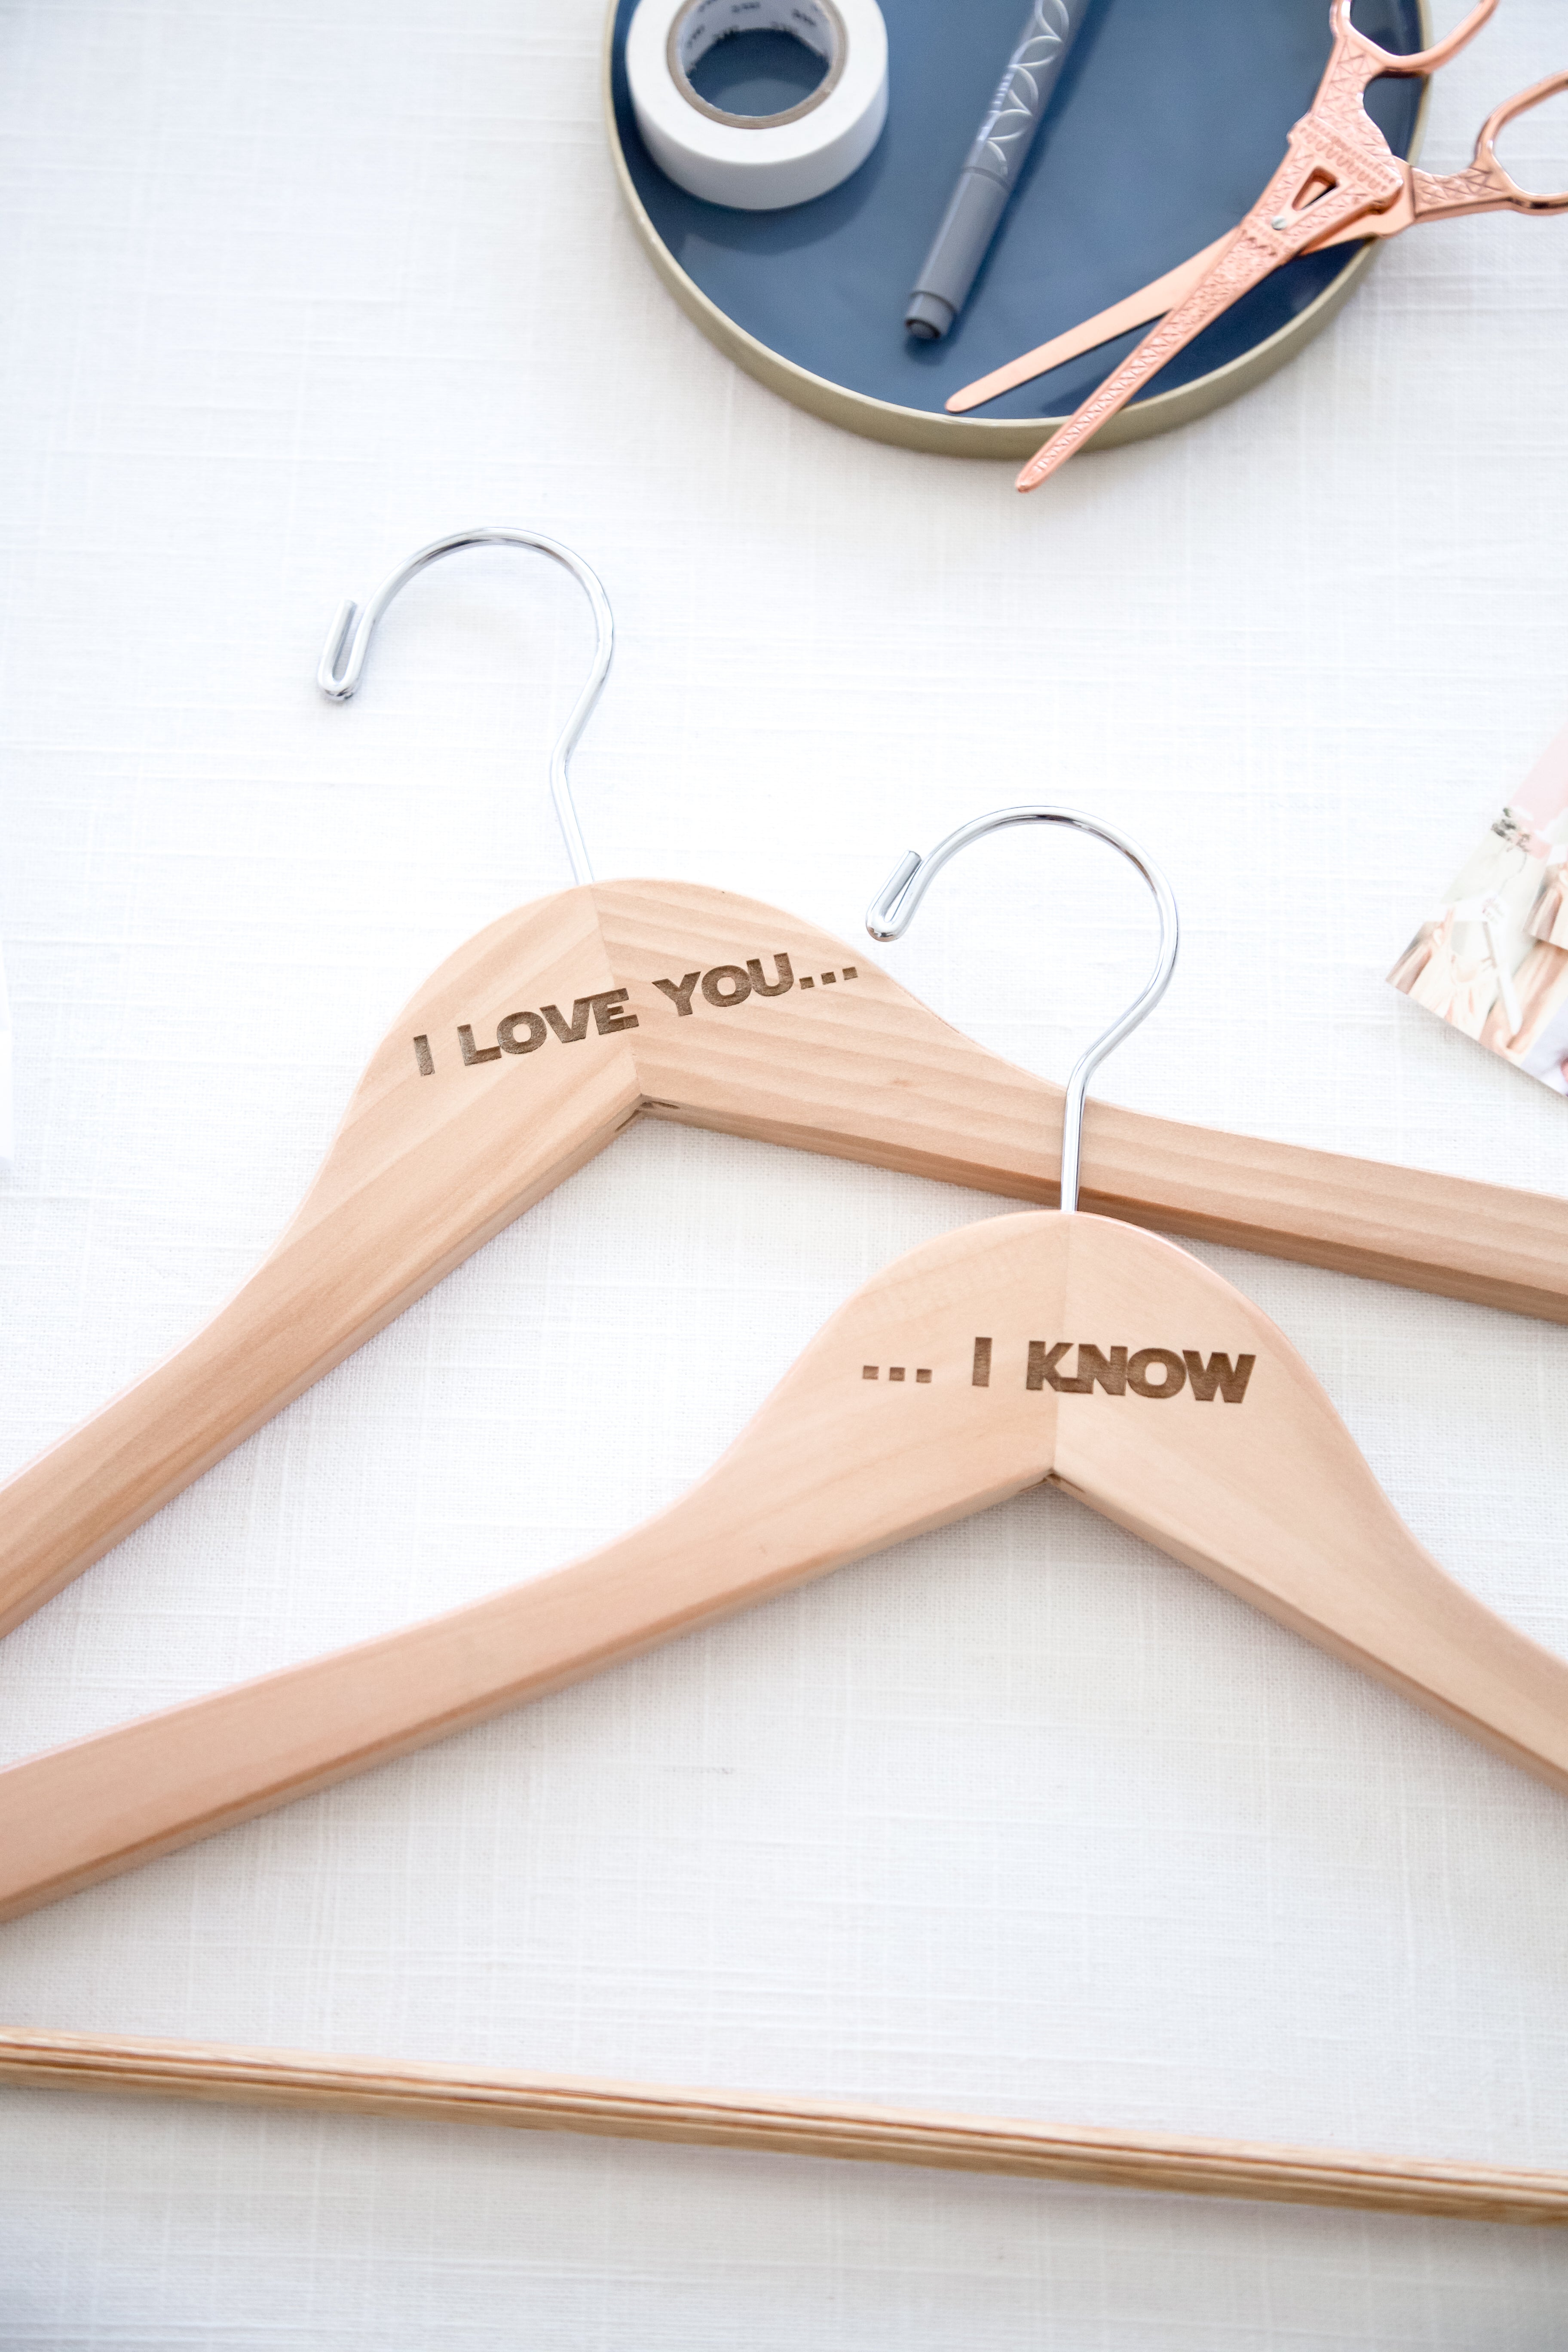 Space/Galaxy/Sci-Fi Themed Wedding Hanger set for Bride and Groom